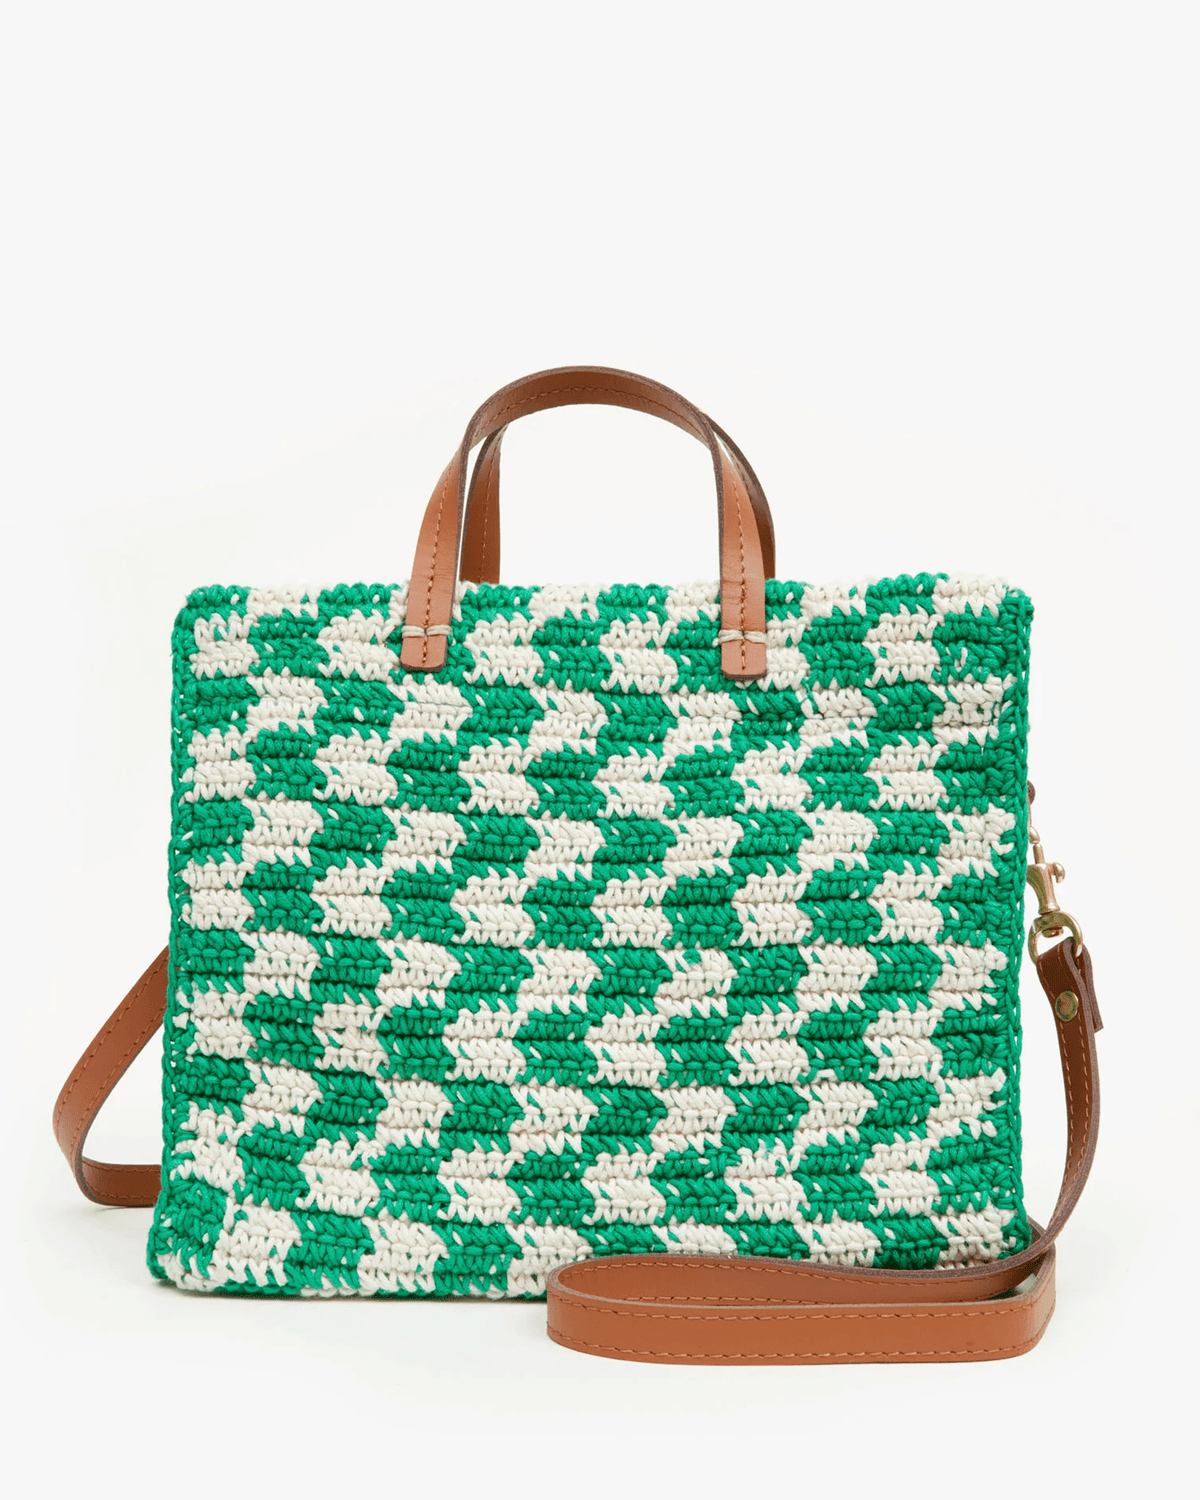 Petit Summer Simple Tote in Sea Green & Cream Crochet Checker Clare V. :  Find the Inspiration within Every Detail